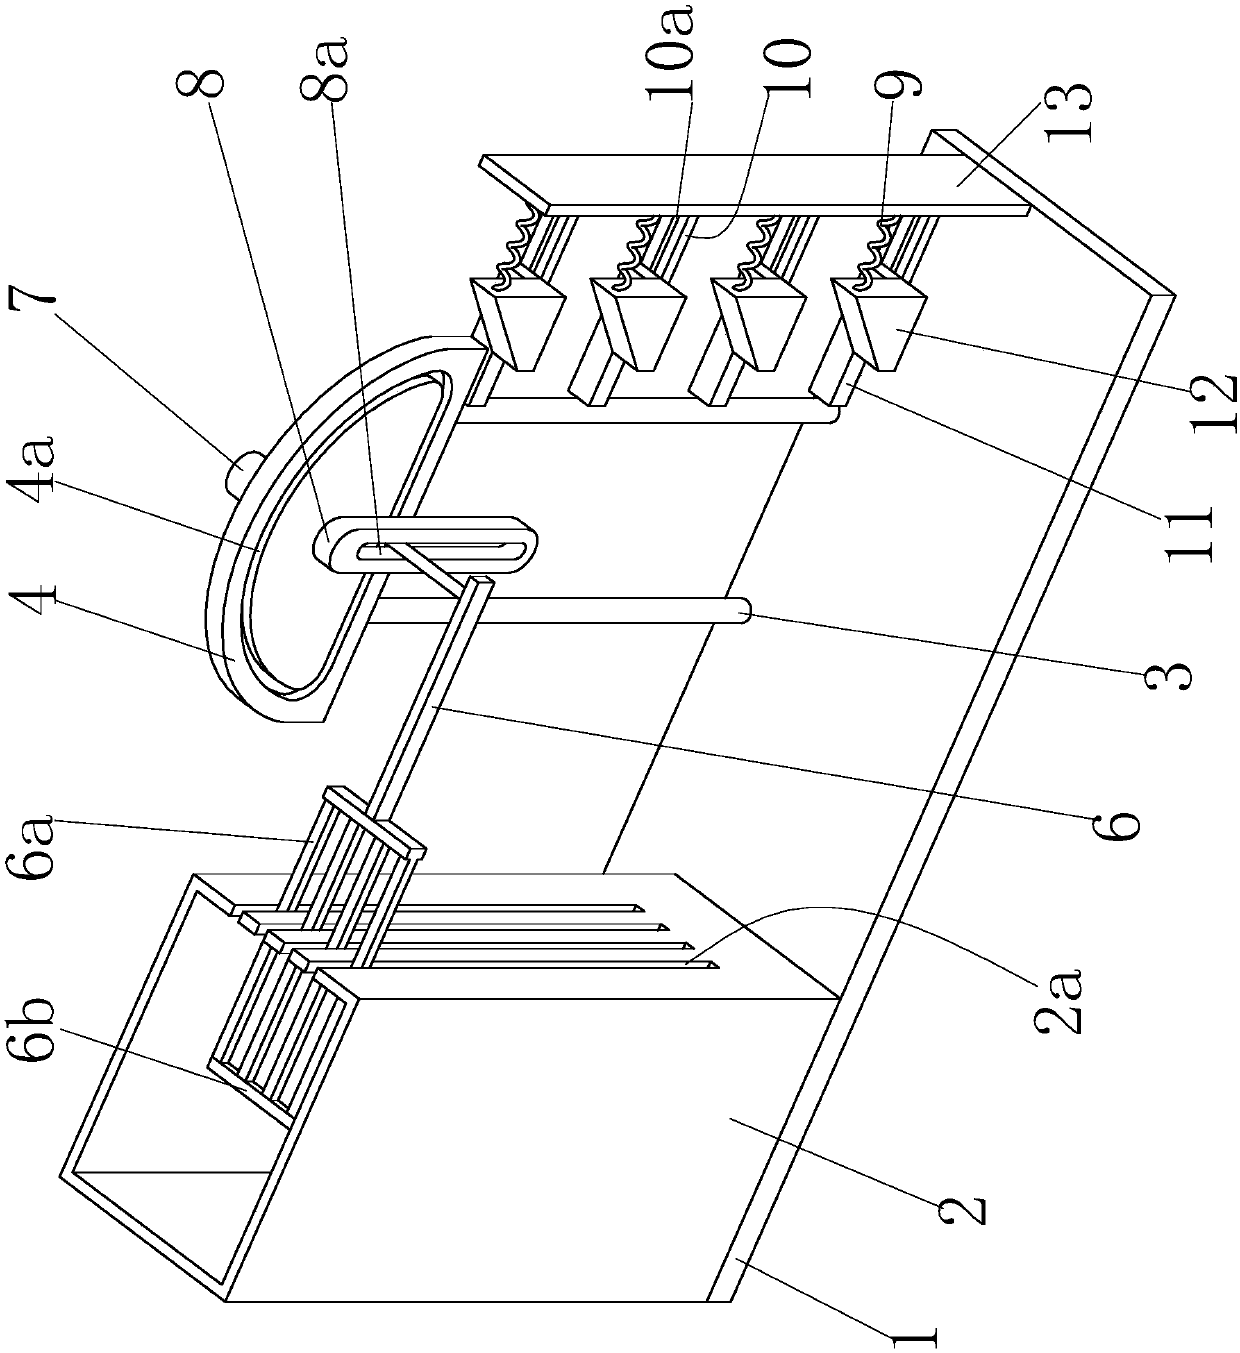 Large-particle margarya melanoide throwing feeding device for leech culturing in pond